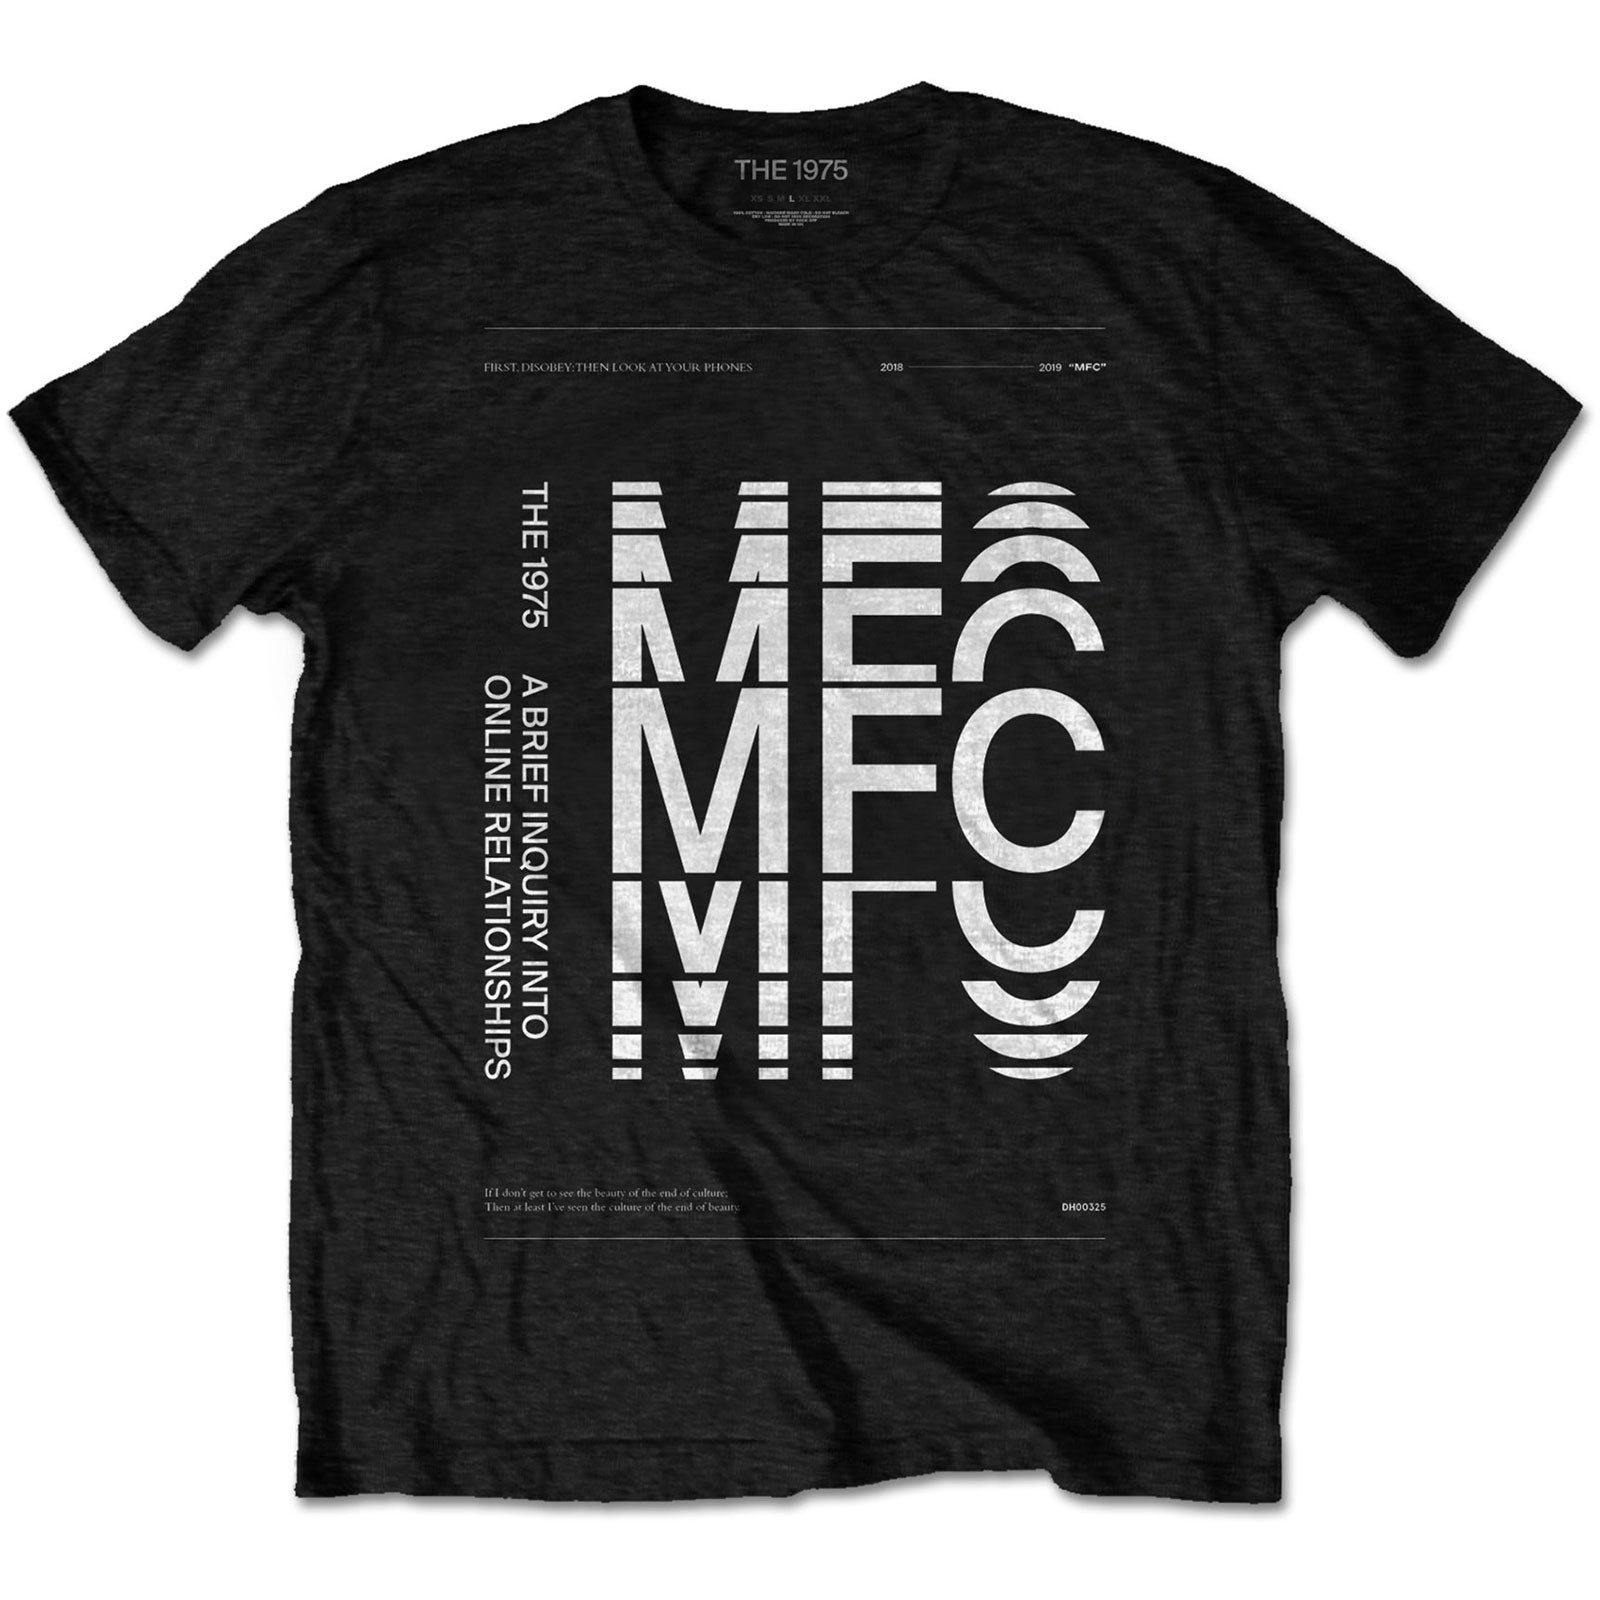 The 1975 Unisex T-Shirt: ABIIOR MFC